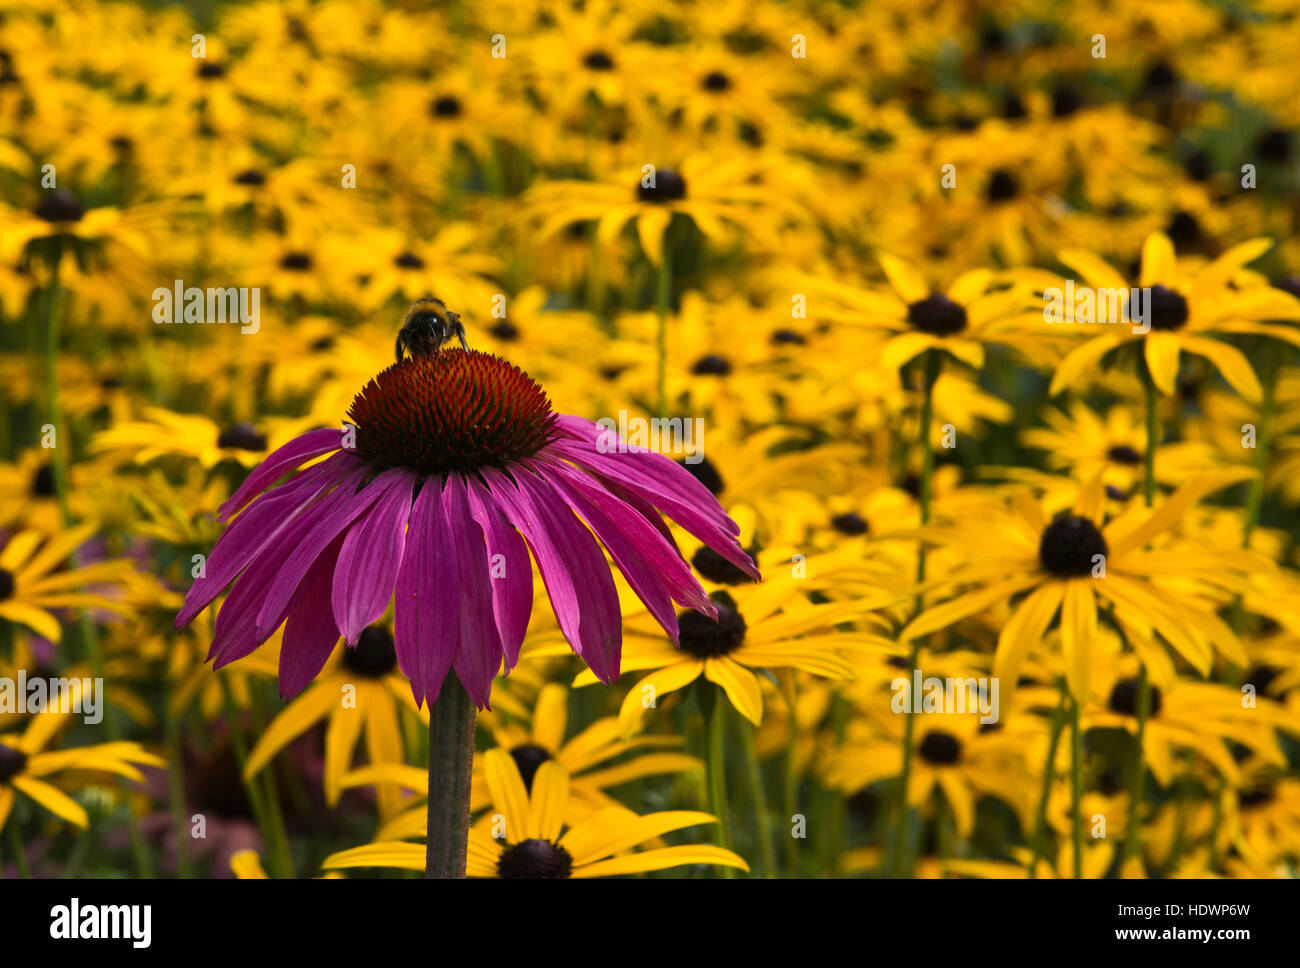 Coneflower (Echinacea purpurea) in the foreground and pink yellow perennial, Rudbeckia Goldsturn in the background. Stock Photo